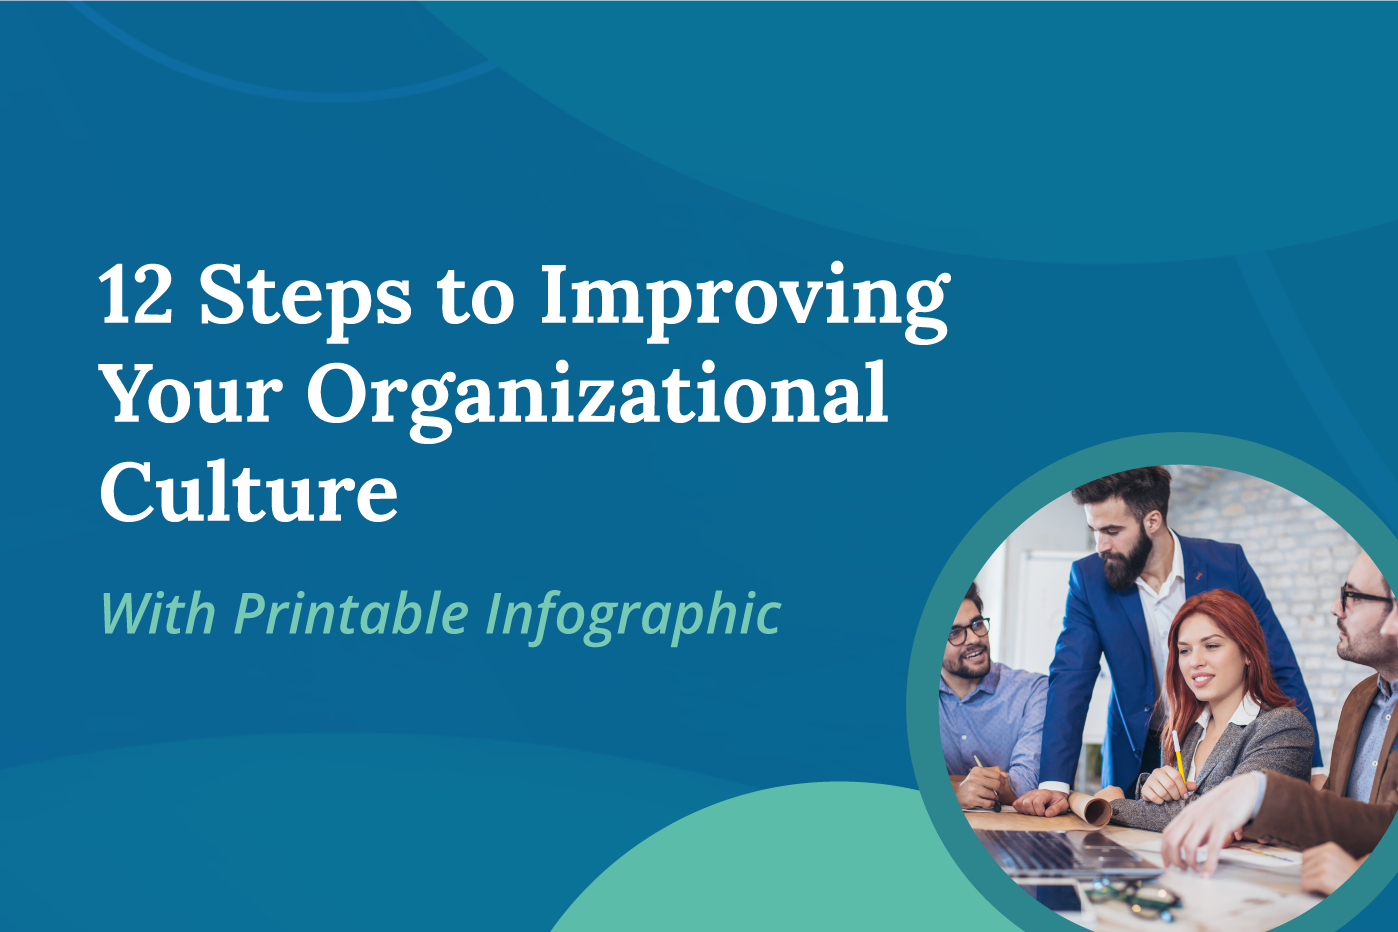 12 Steps to Improving Your Organizational Culture